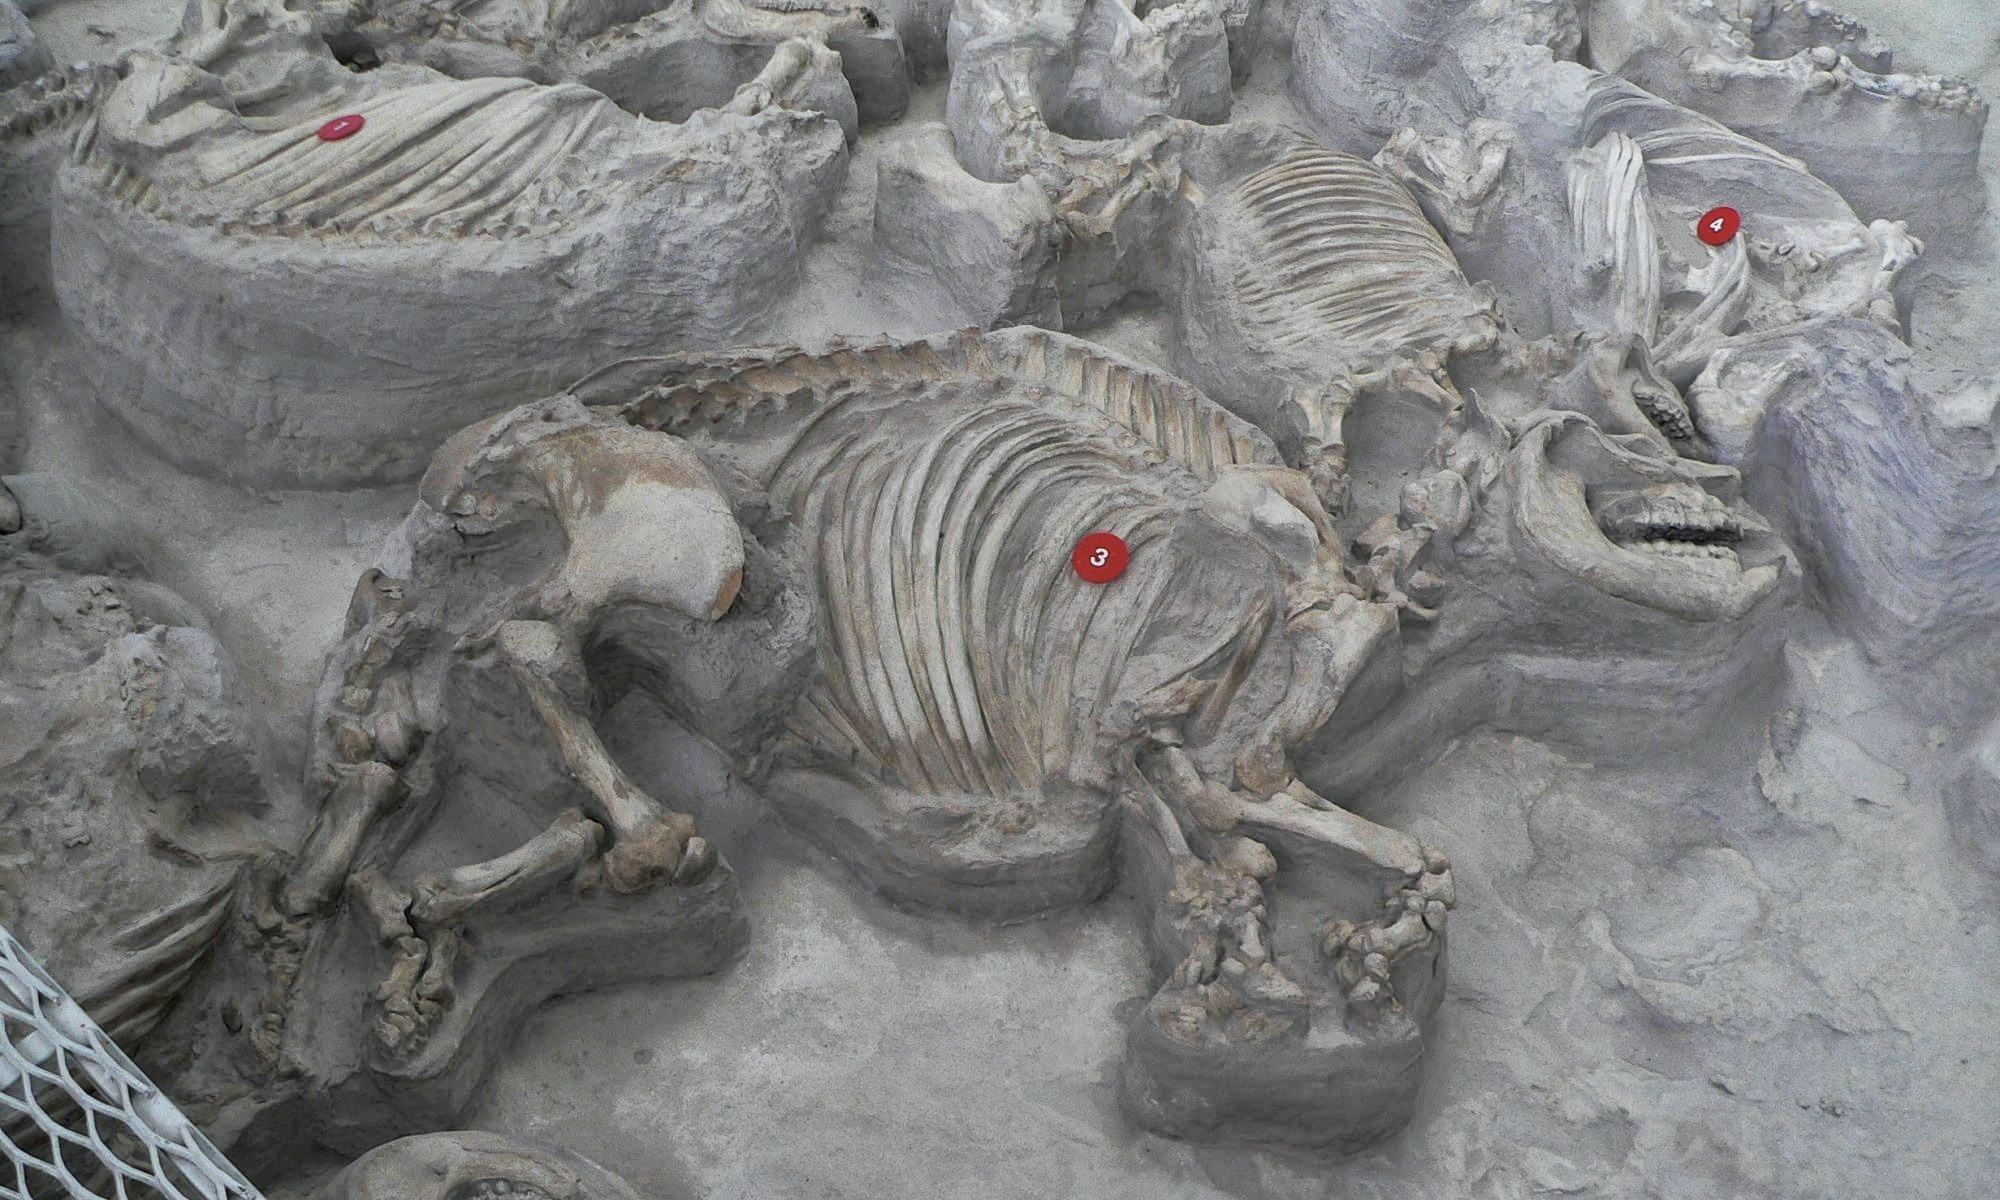 Hundreds of well-preserved prehistoric animals found in an ancient ash bed in Nebraska 1